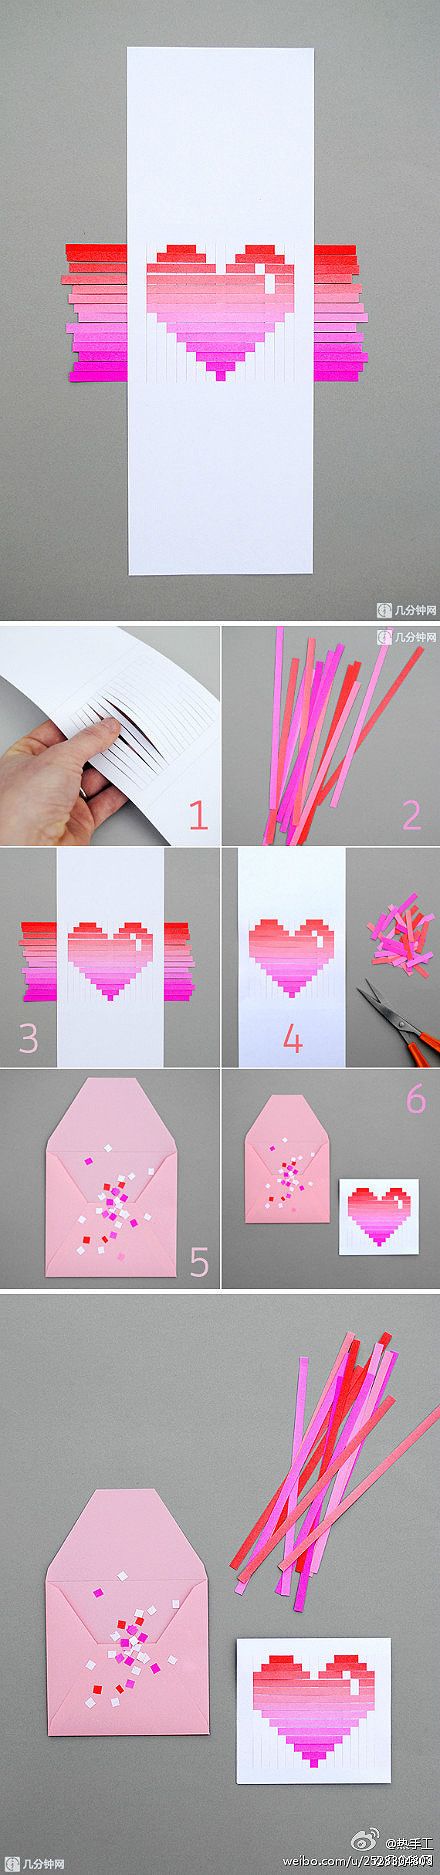 weaving with paper